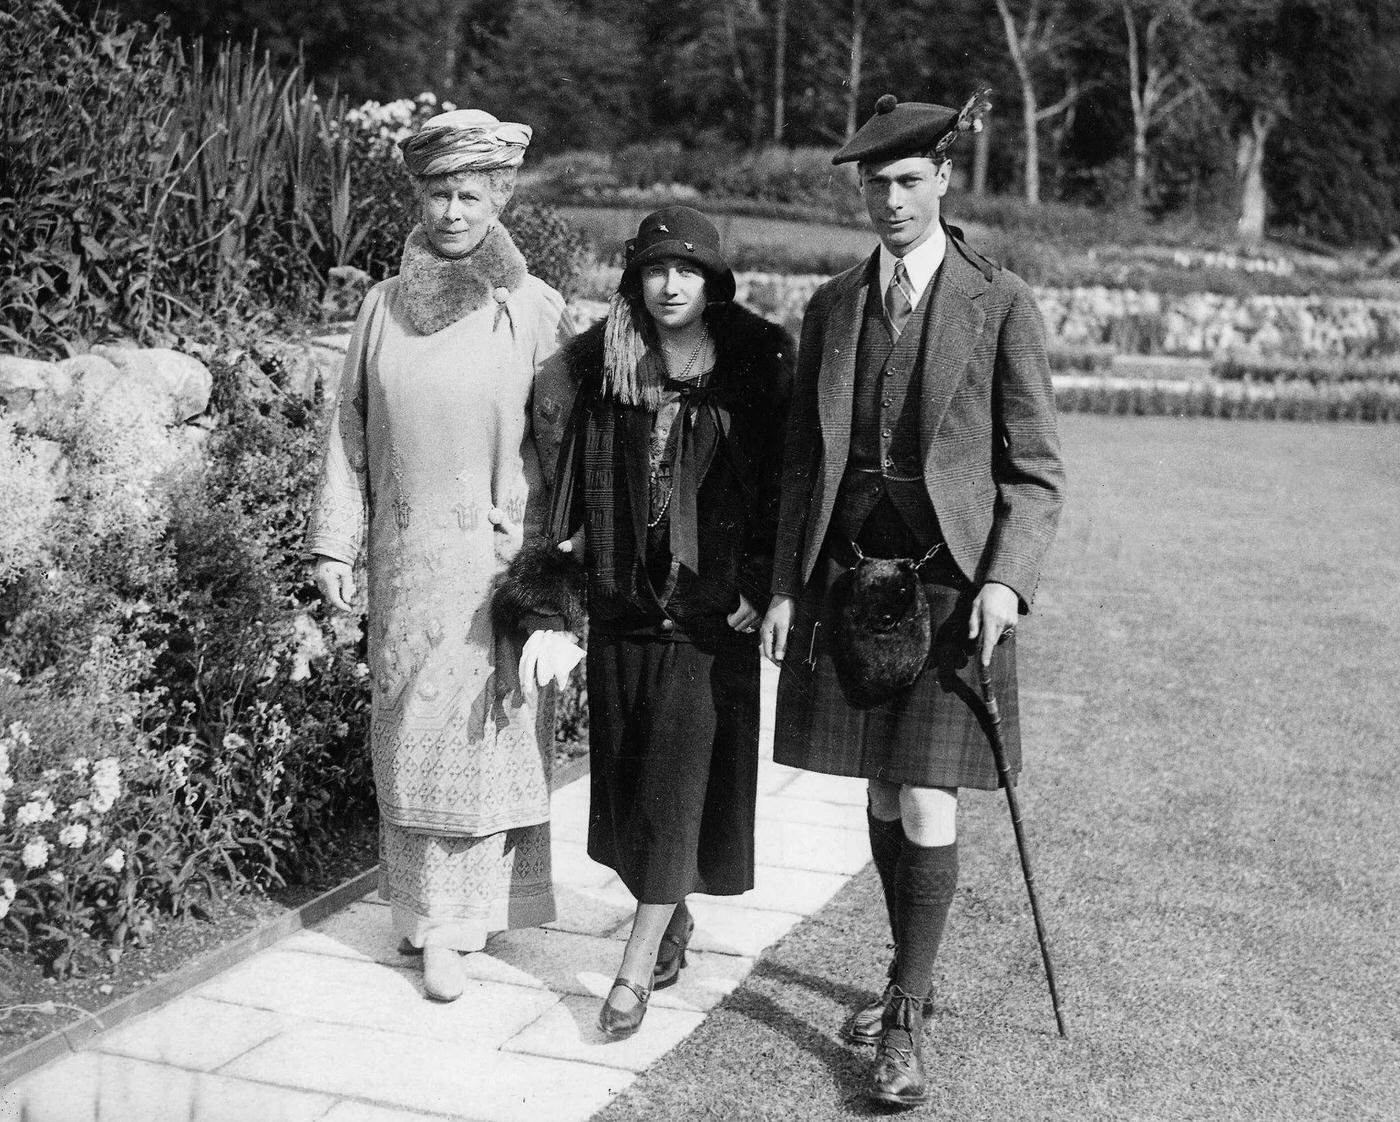 Queen Elizabeth when she was the Duchess of York with her husband the Duke of York in the gardens at Balmoral Castle, Scotland.